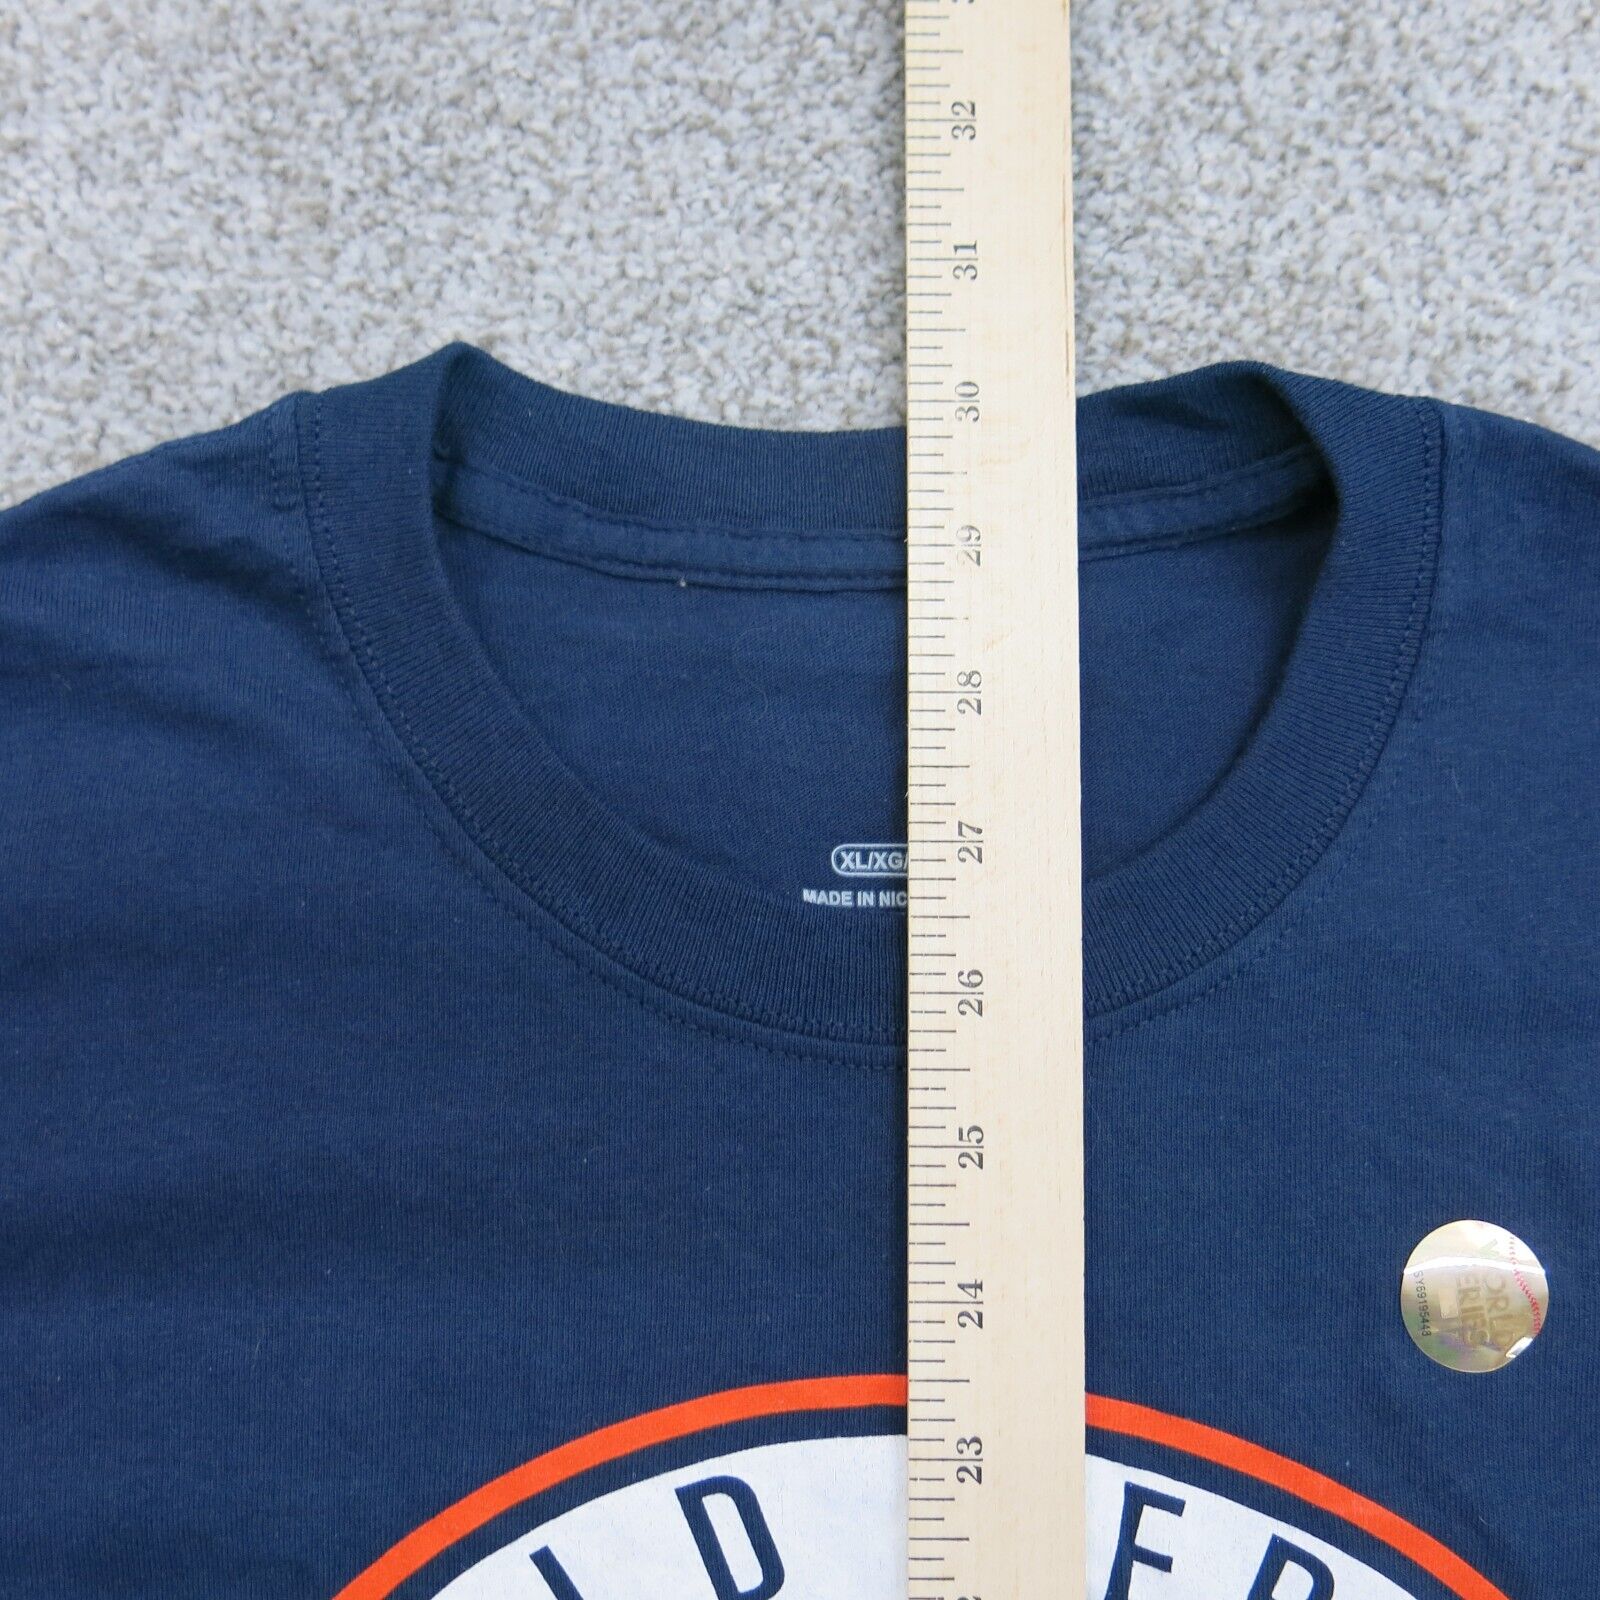 Used Thrift 2017 Astros World Champions Tee, Blue, XL